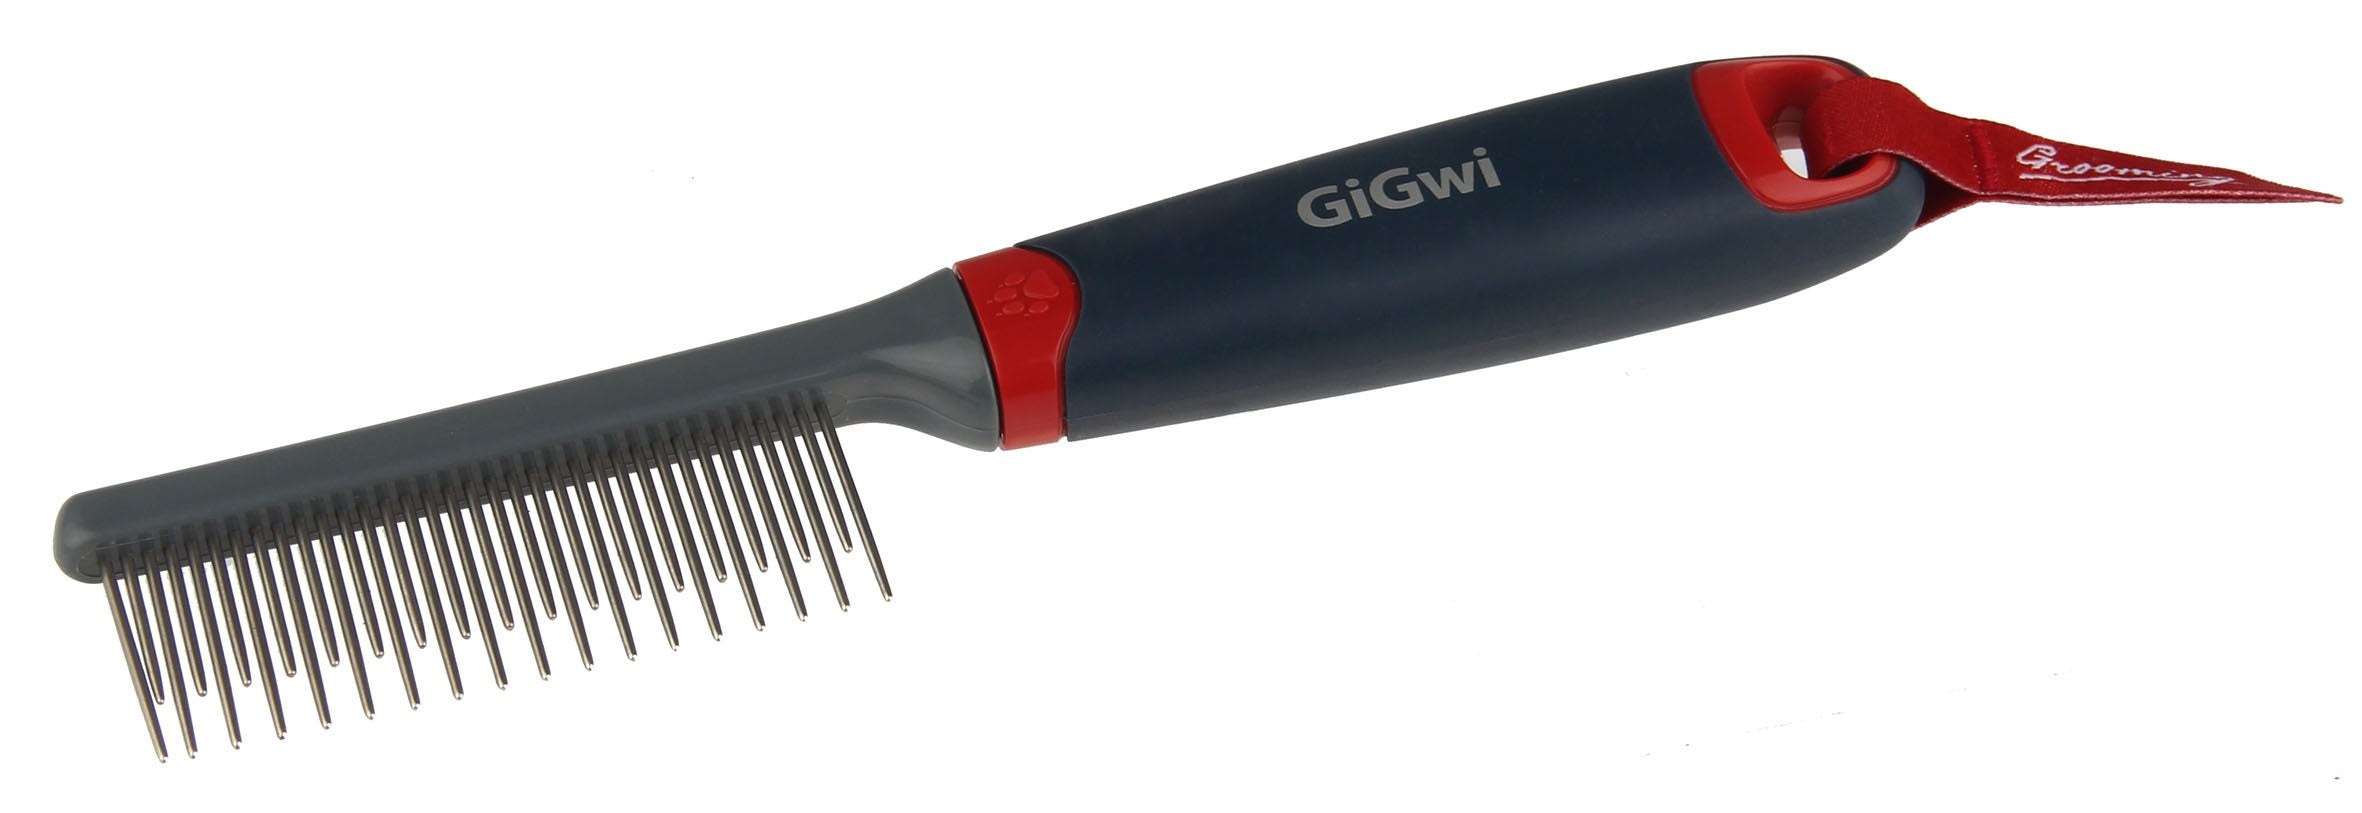 Gigwi Grooming Regular Comb For Dogs & Cats